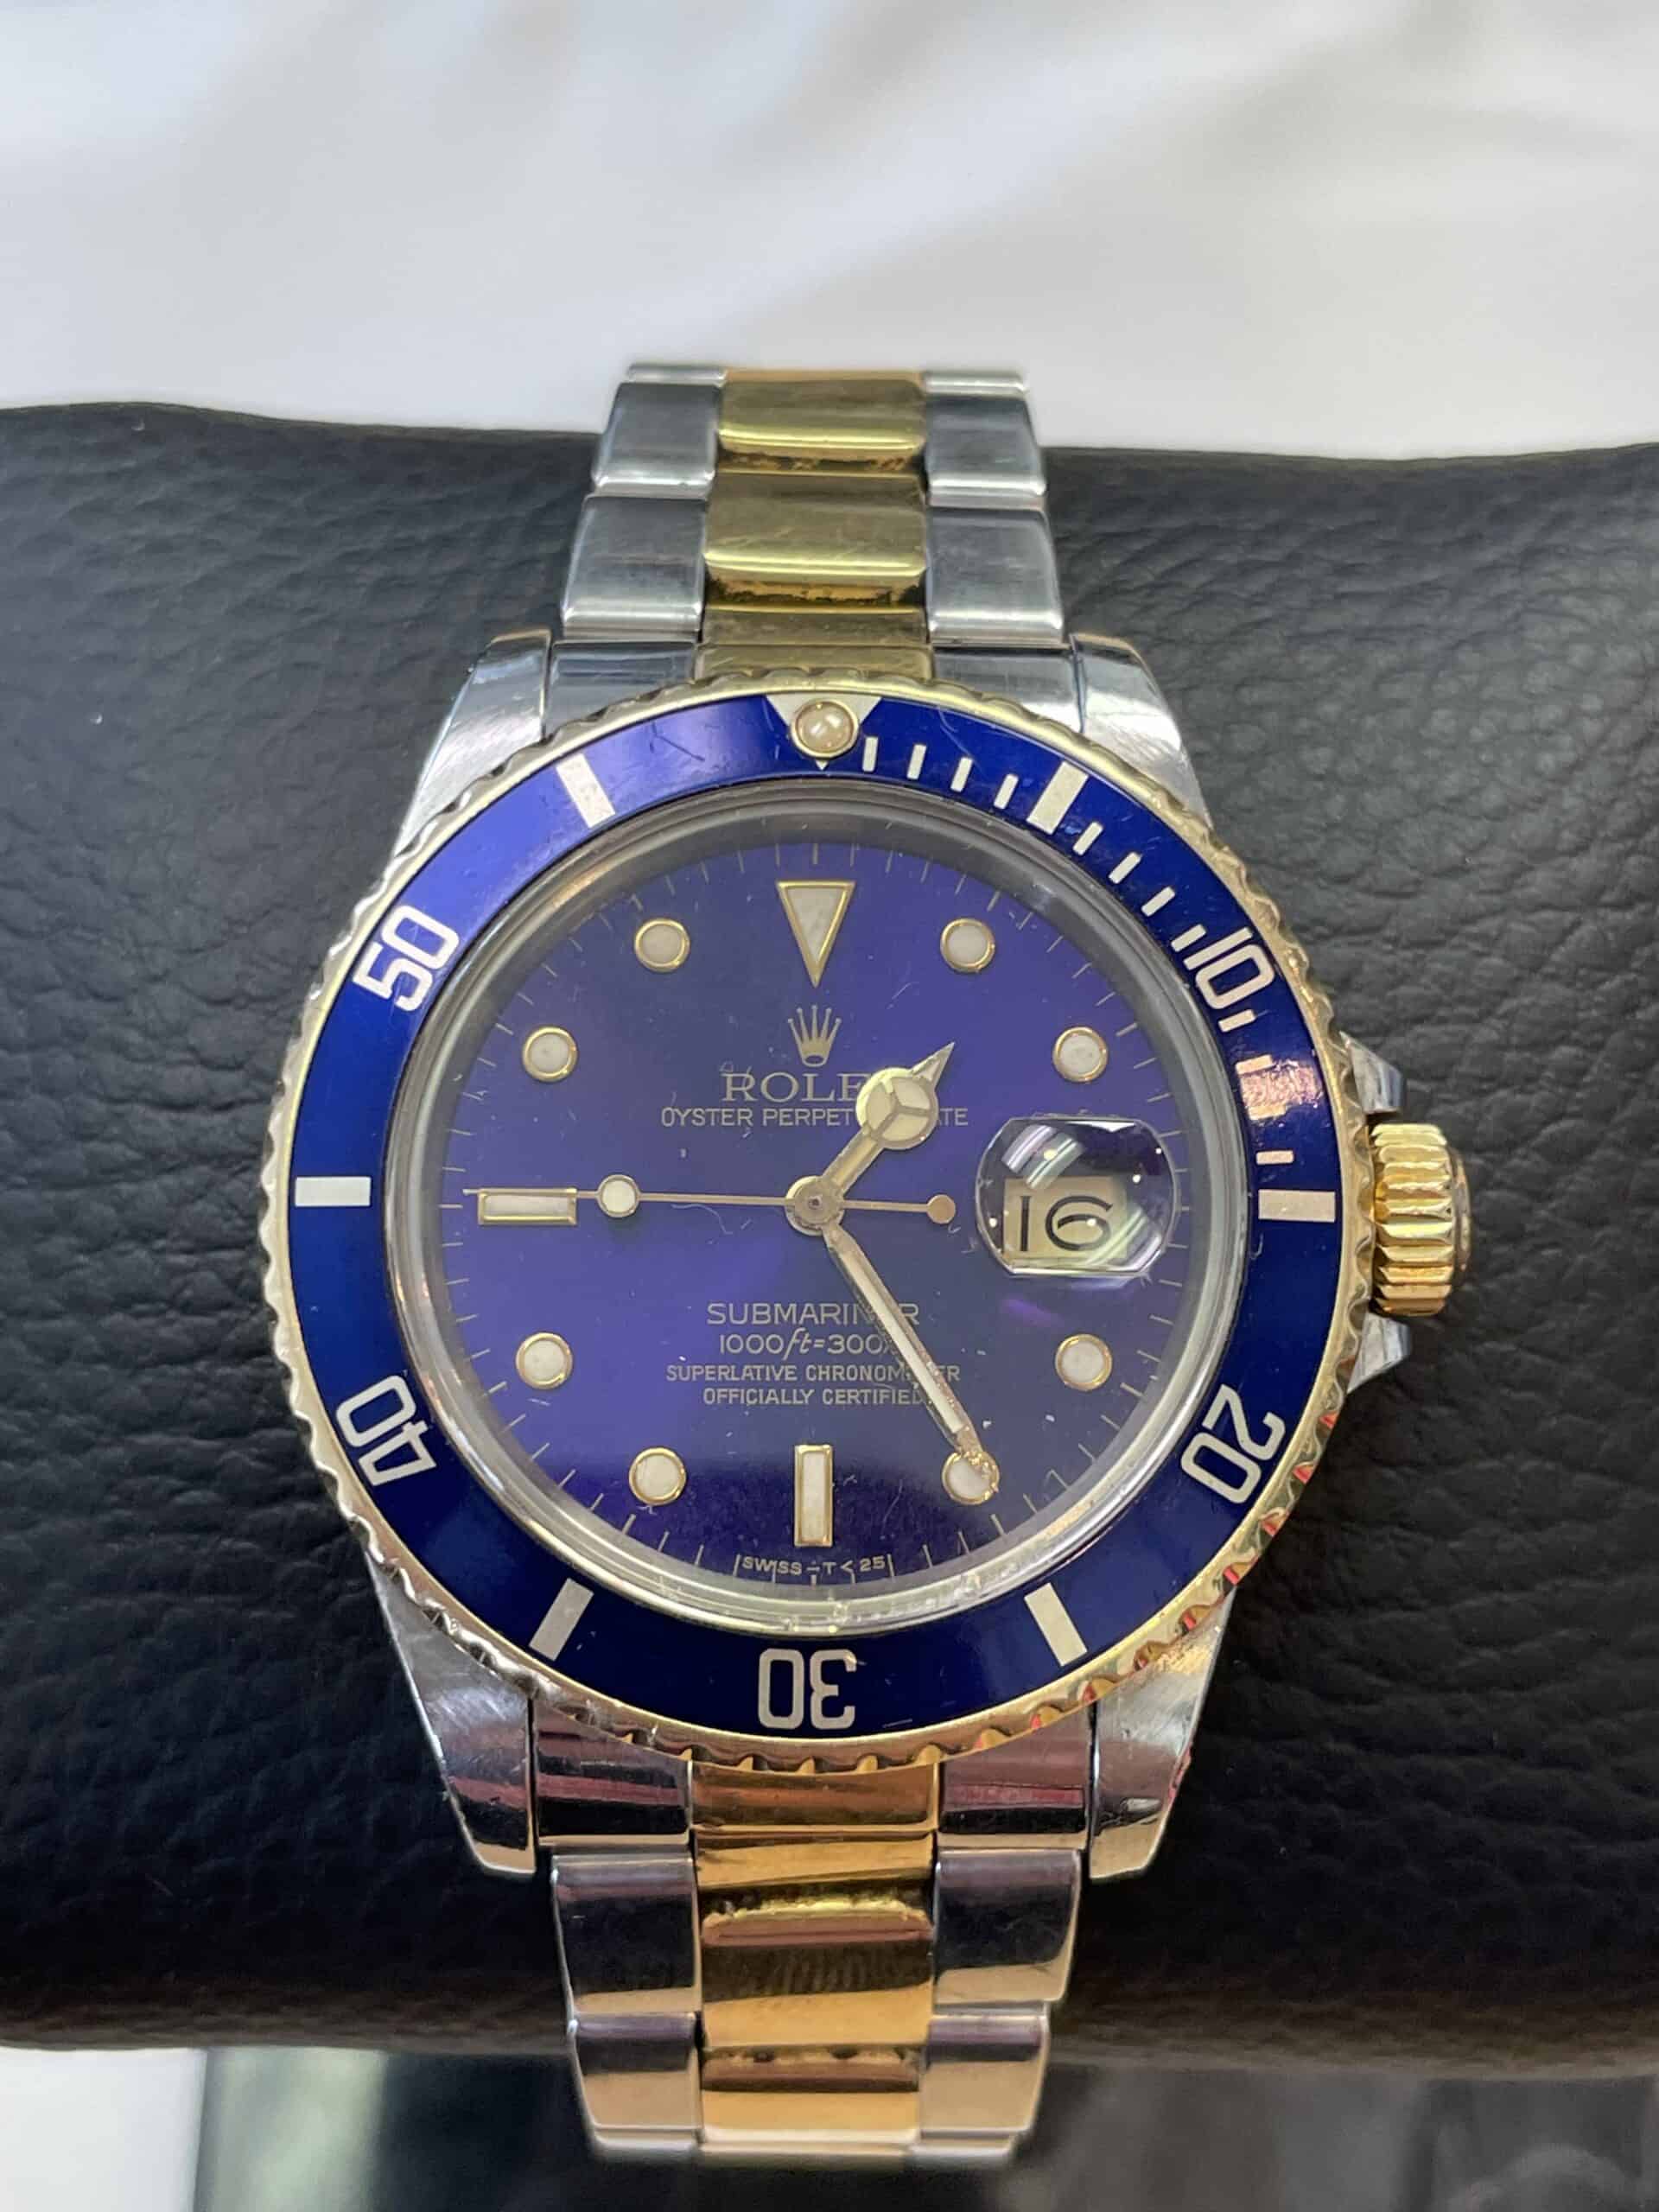 ROLEX 16803 SUBMARINER TWO TONE BLUE DIAL AND BEZEL – 001209 - WPB Watch CO